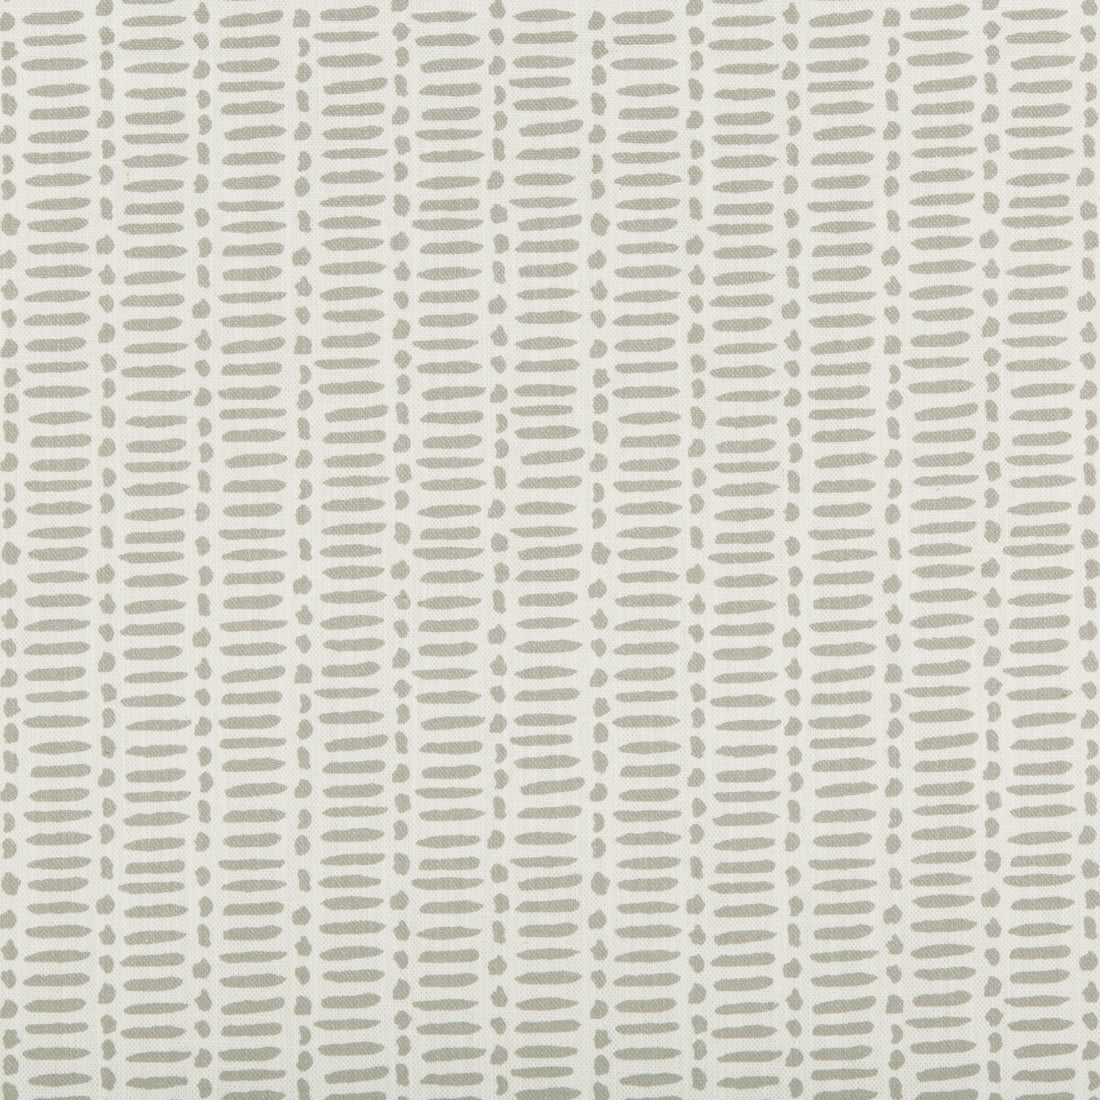 Dash Off fabric in quartz color - pattern DASH OFF.11.0 - by Kravet Basics in the Nate Berkus Well-Traveled collection